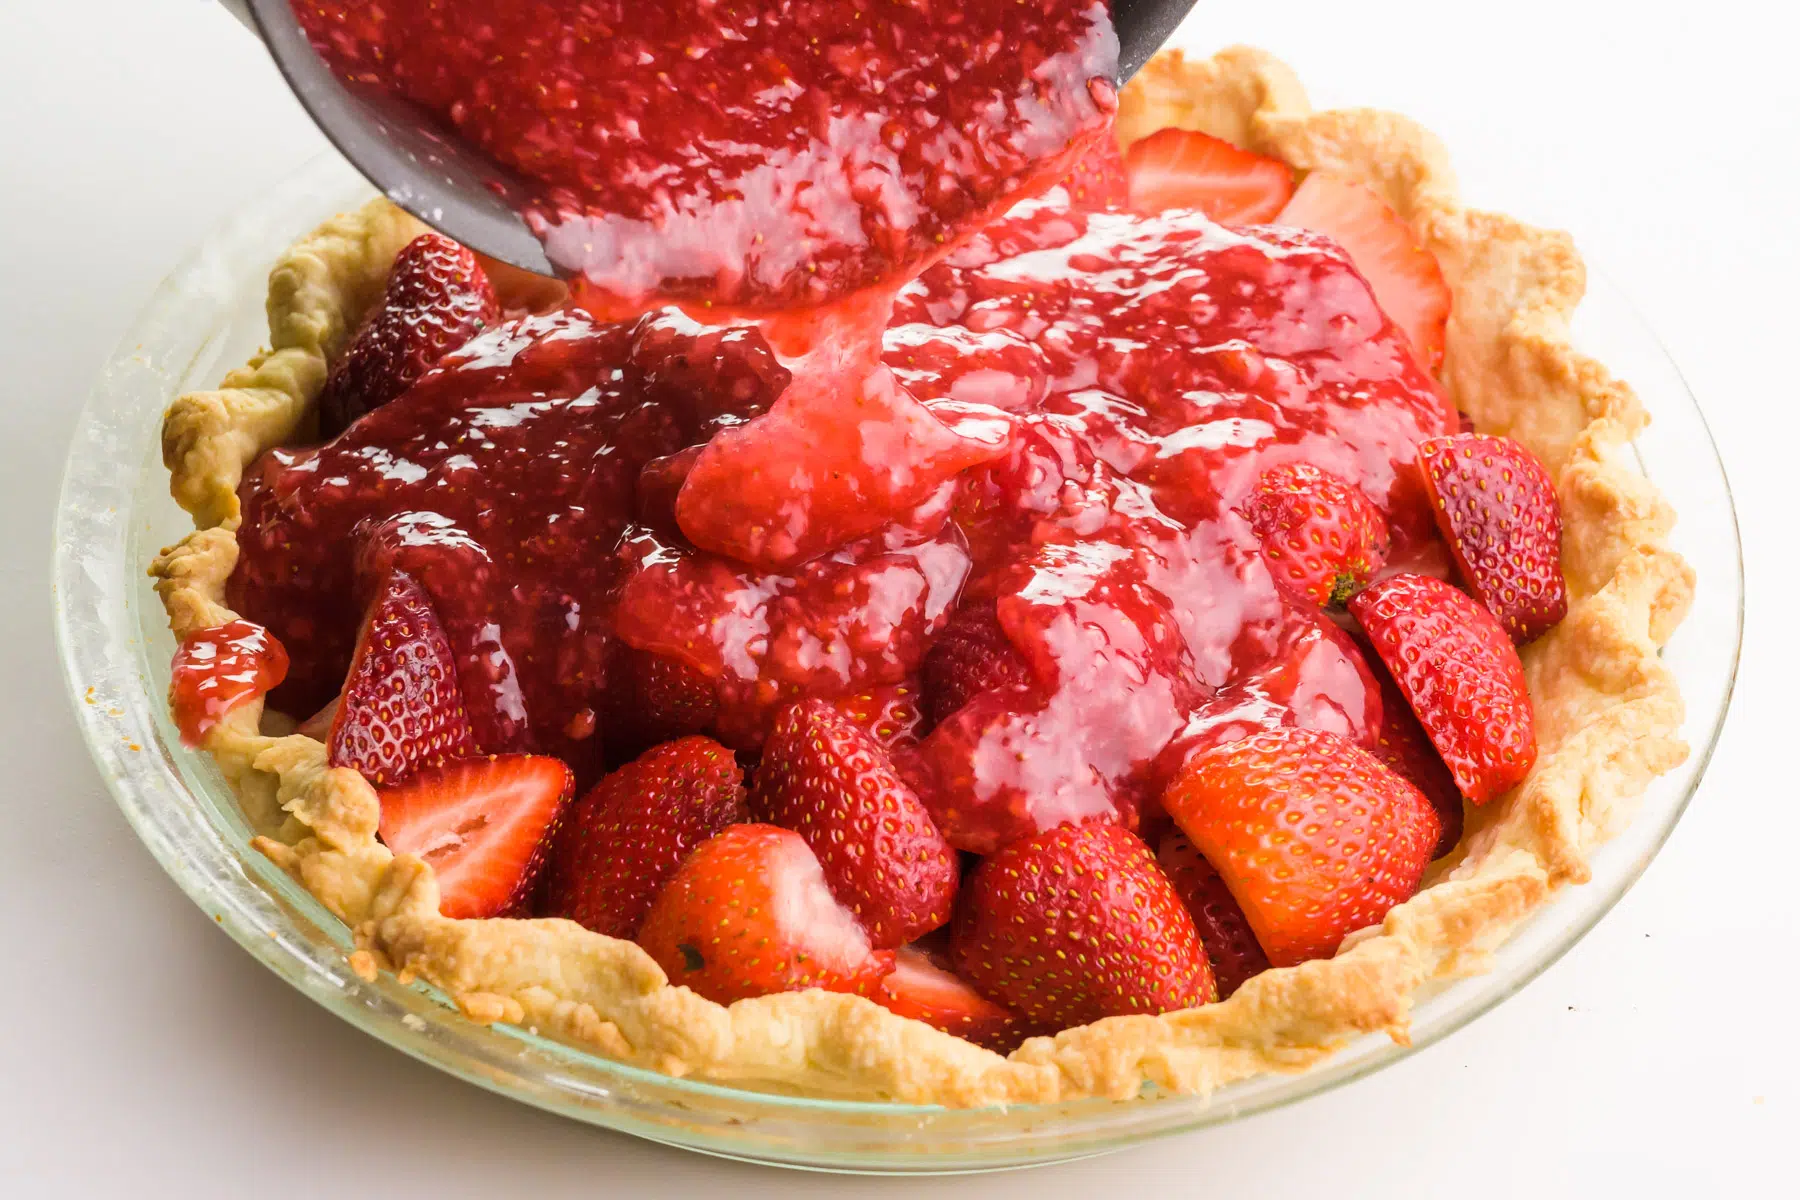 A thick strawberry gel is being poured over fresh strawberries in baked pie crust.